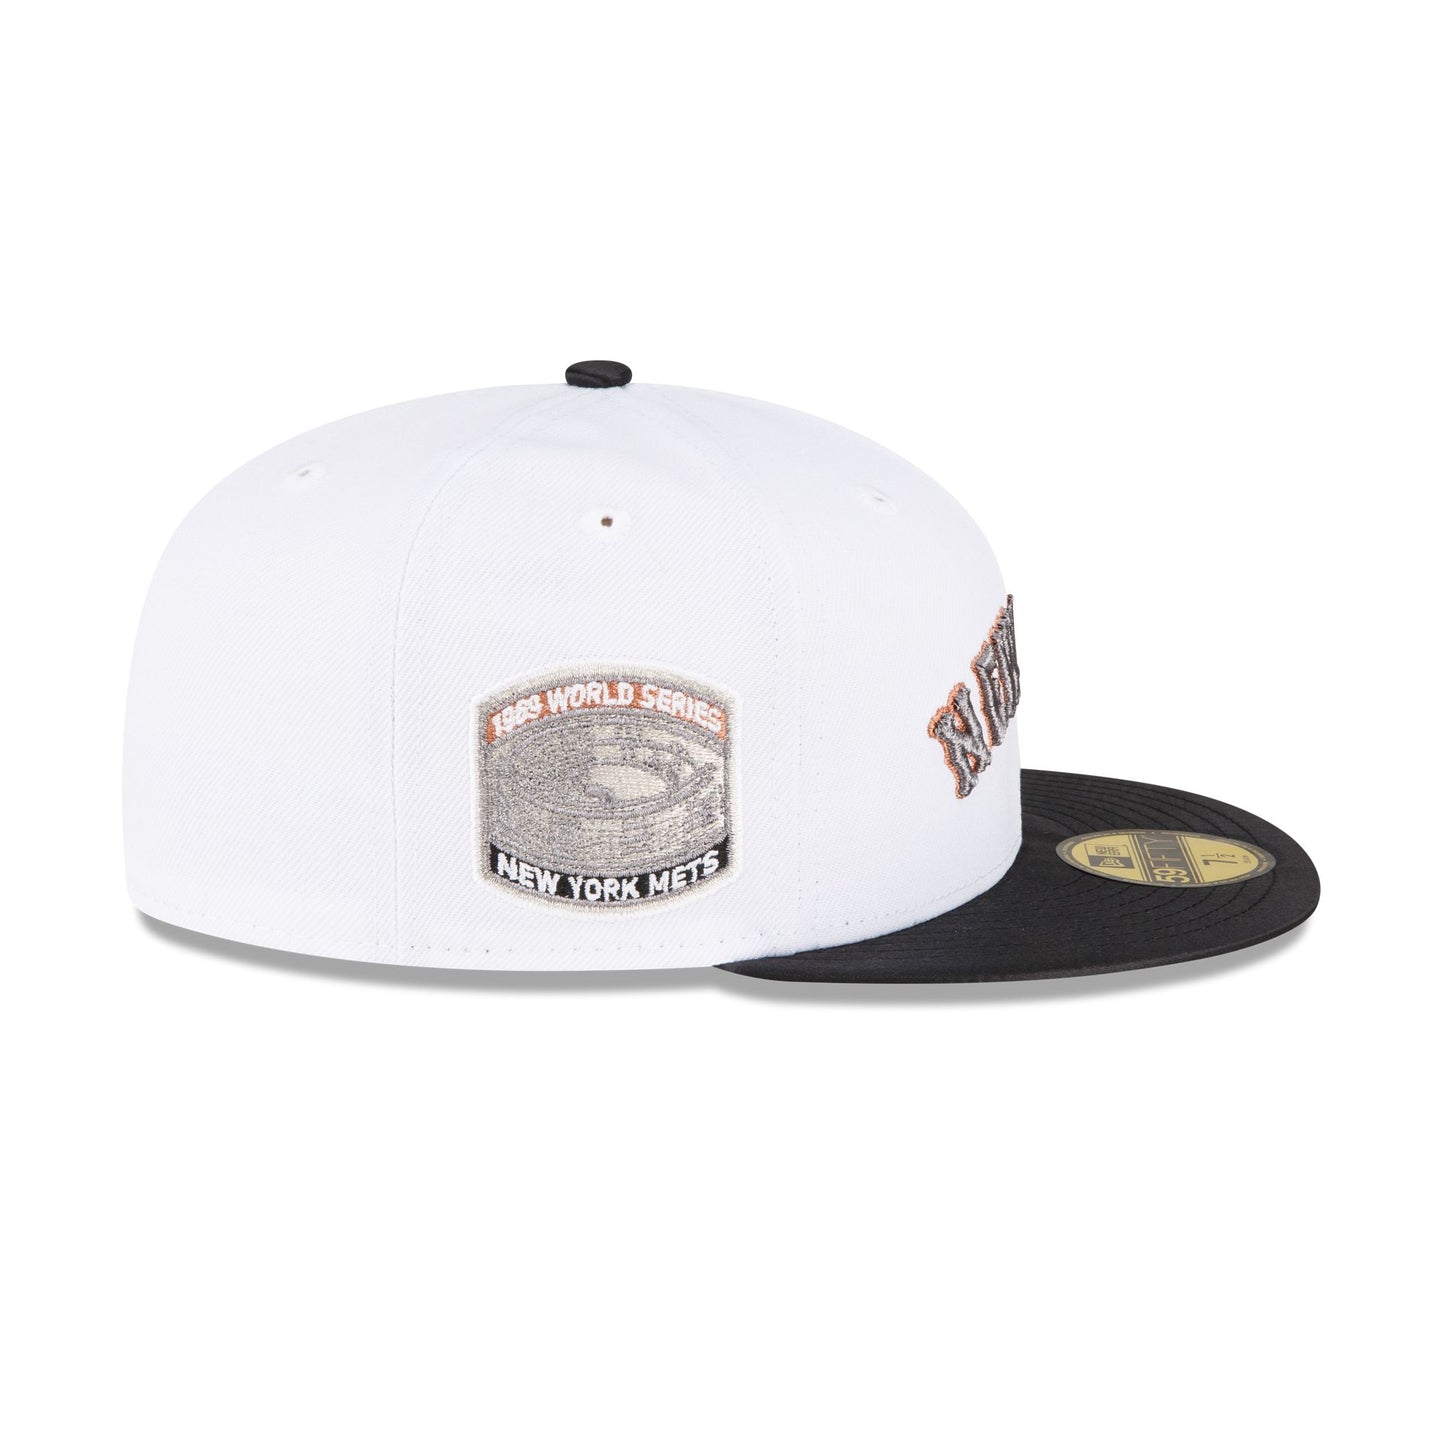 St. Louis Cardinals New Era Optic 59FIFTY Fitted Hat - White/Red